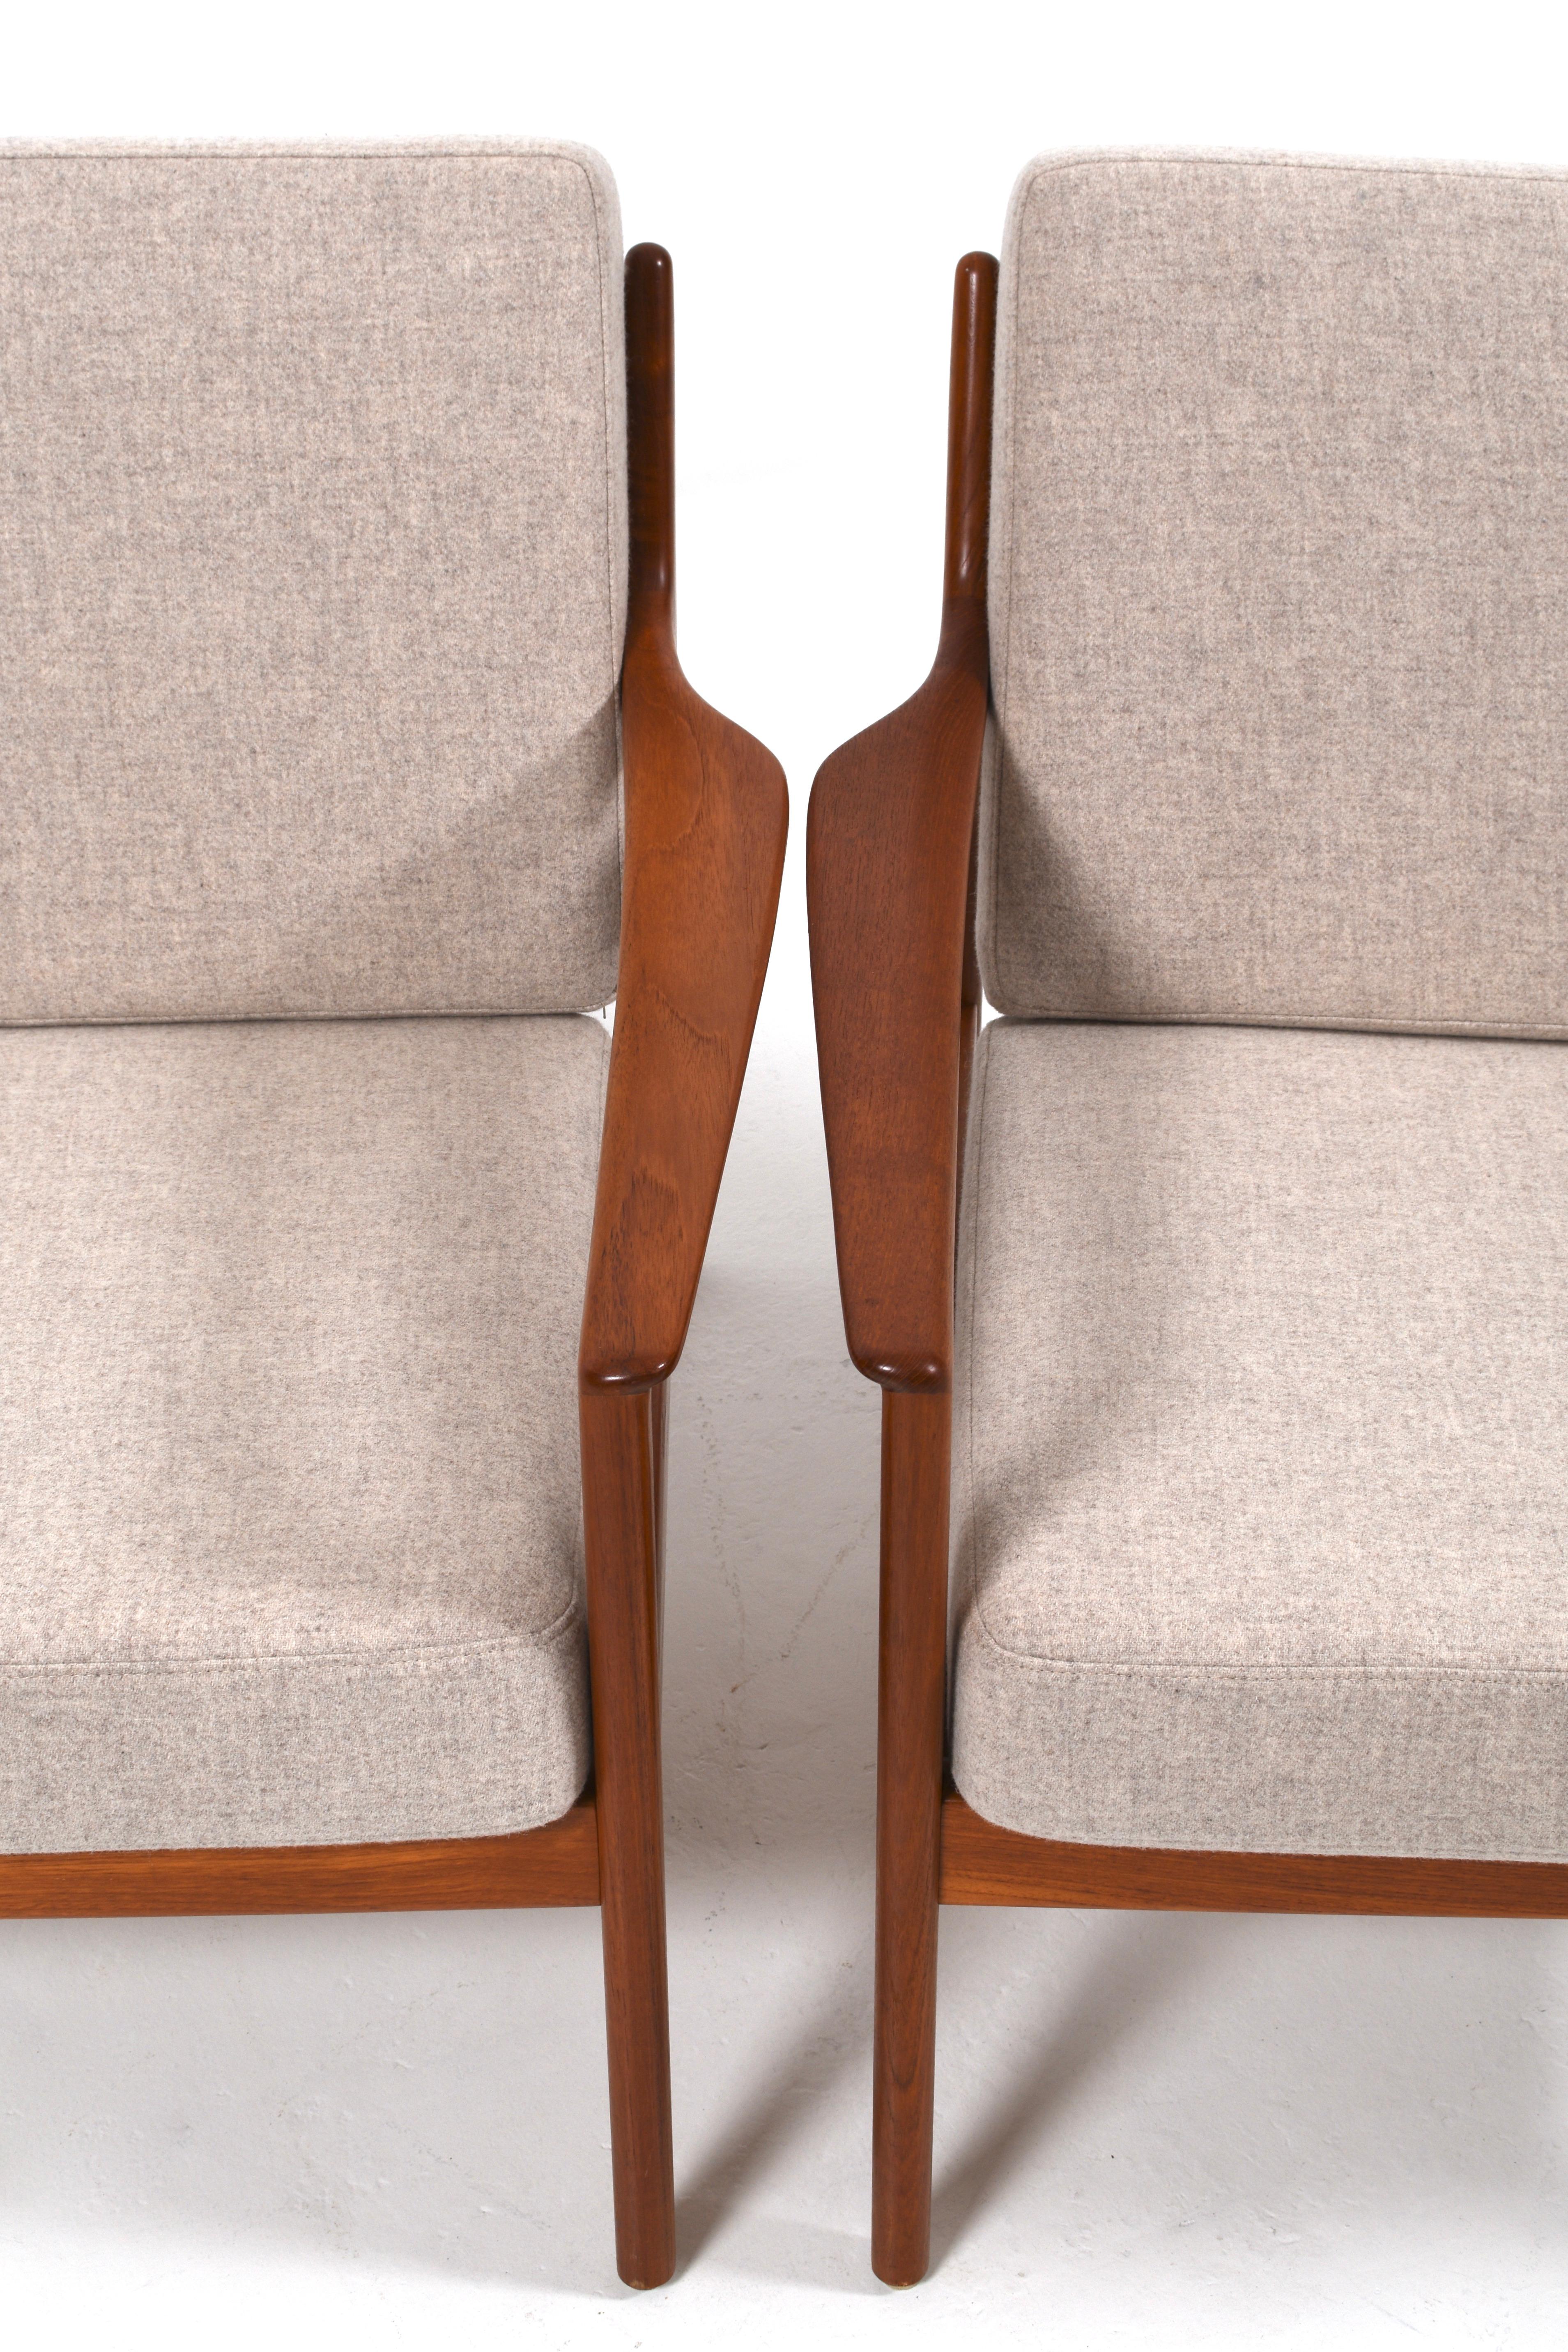 Pair of “USA 75” Teak Lounge Chairs by Folke Ohlsson for DUX, Sweden, 1960s For Sale 1